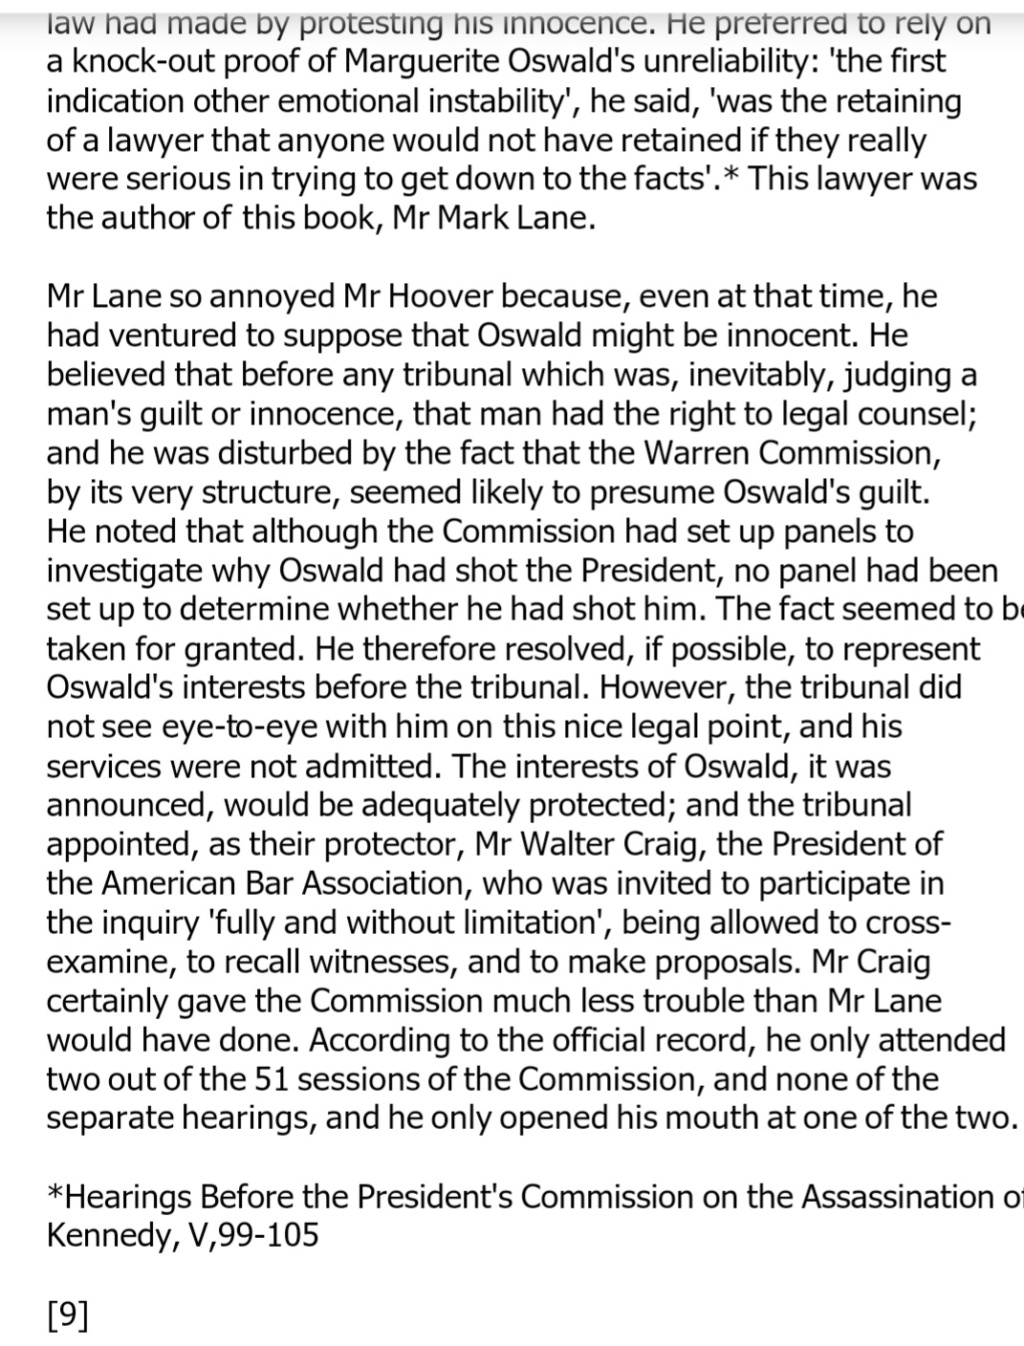 oswald - WALTER EARLY CRAIG - Oswald’s "Defense" Counsel  Scree400